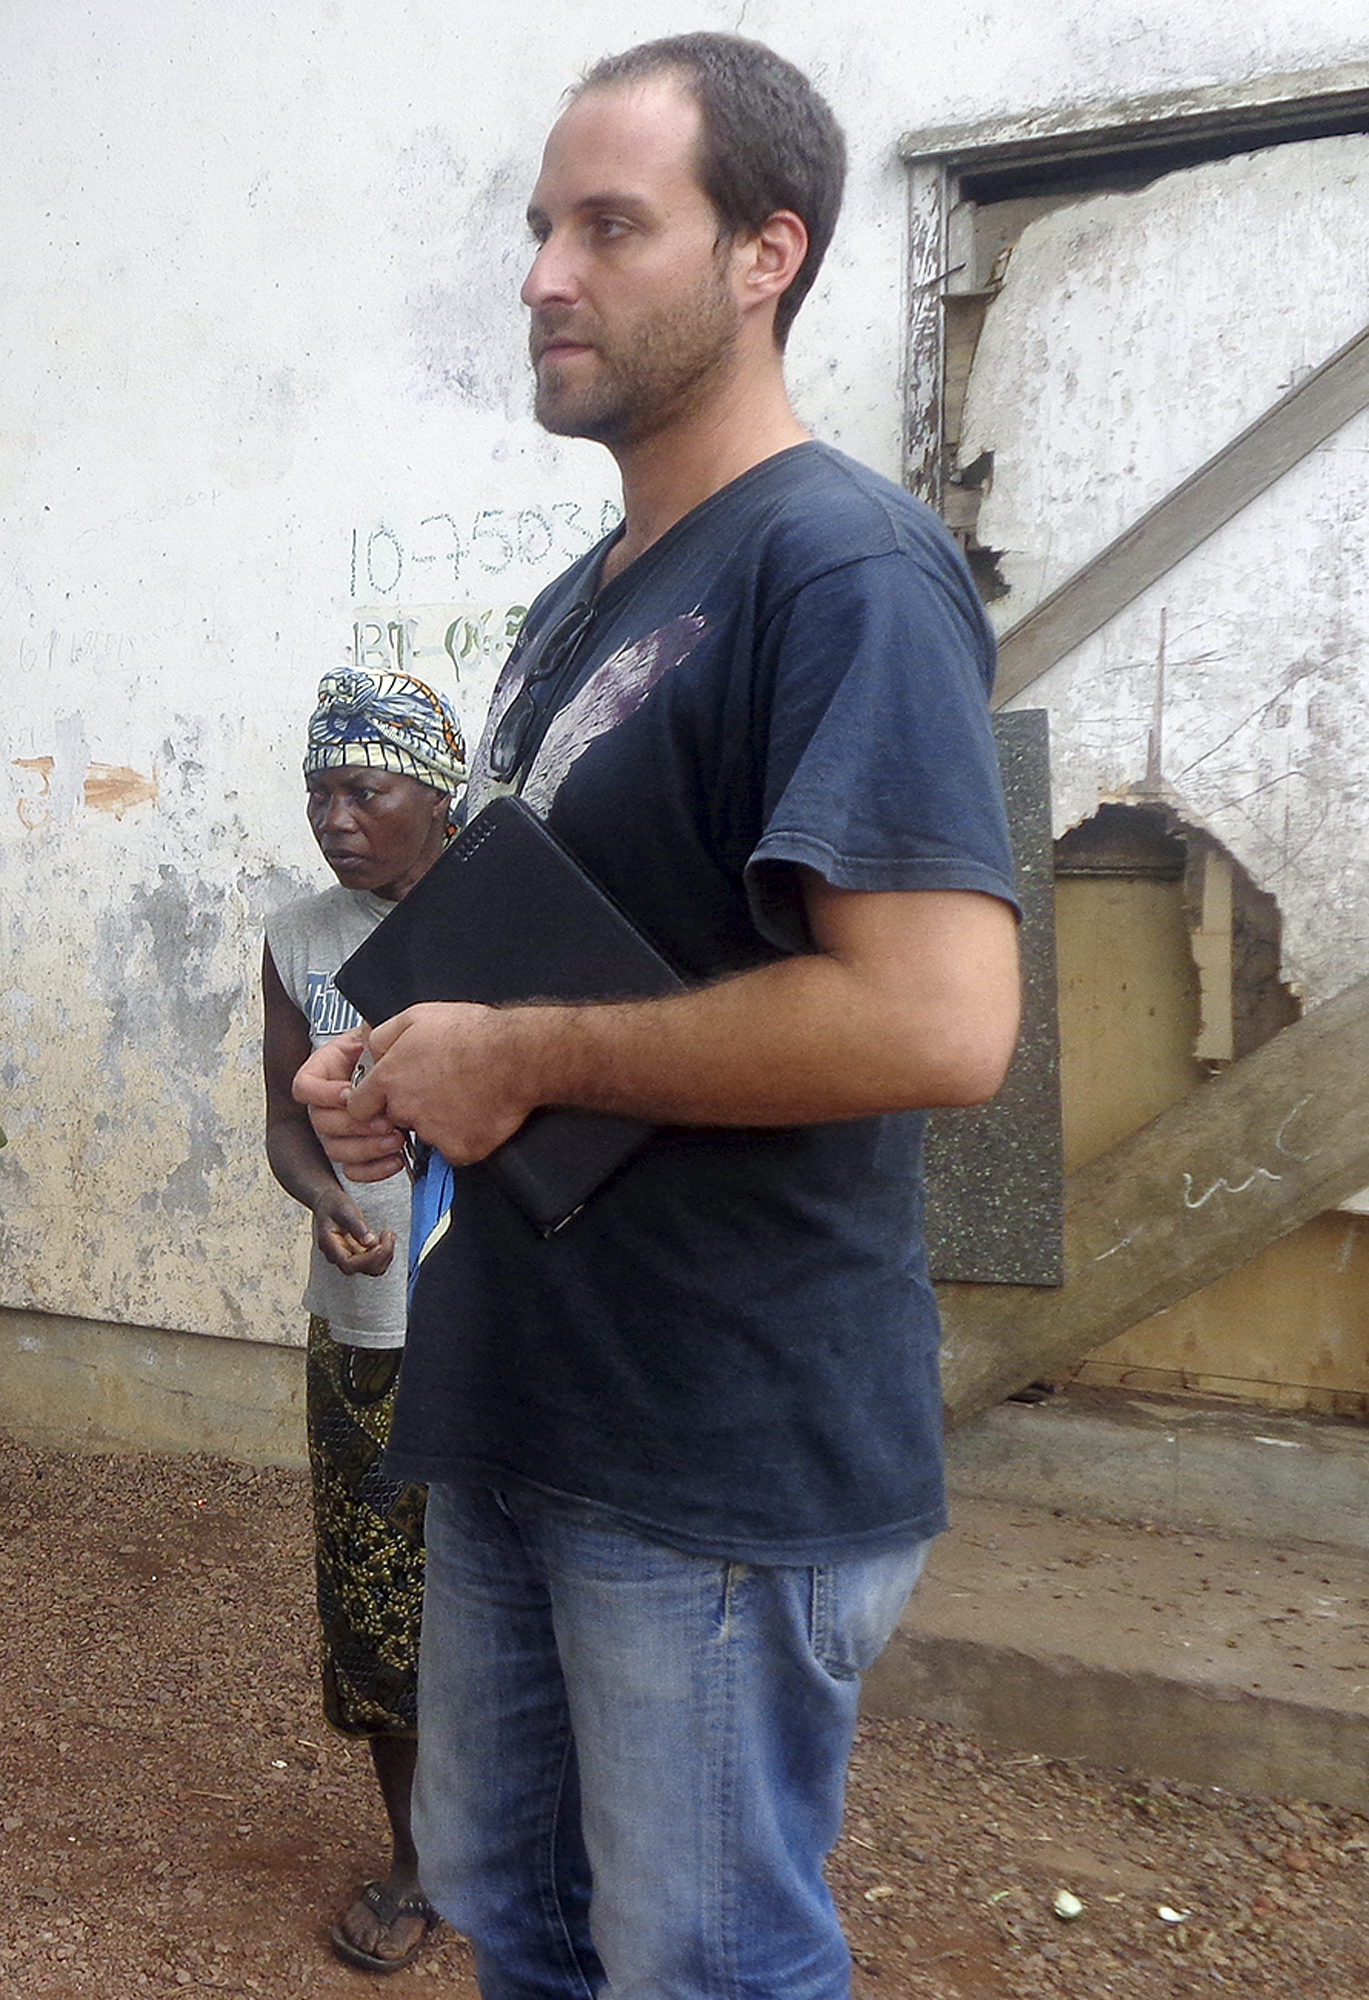 American video journalist Ashoka Mukpo at an iron ore mining camp in Bong County, Liberia in Aug. 2013